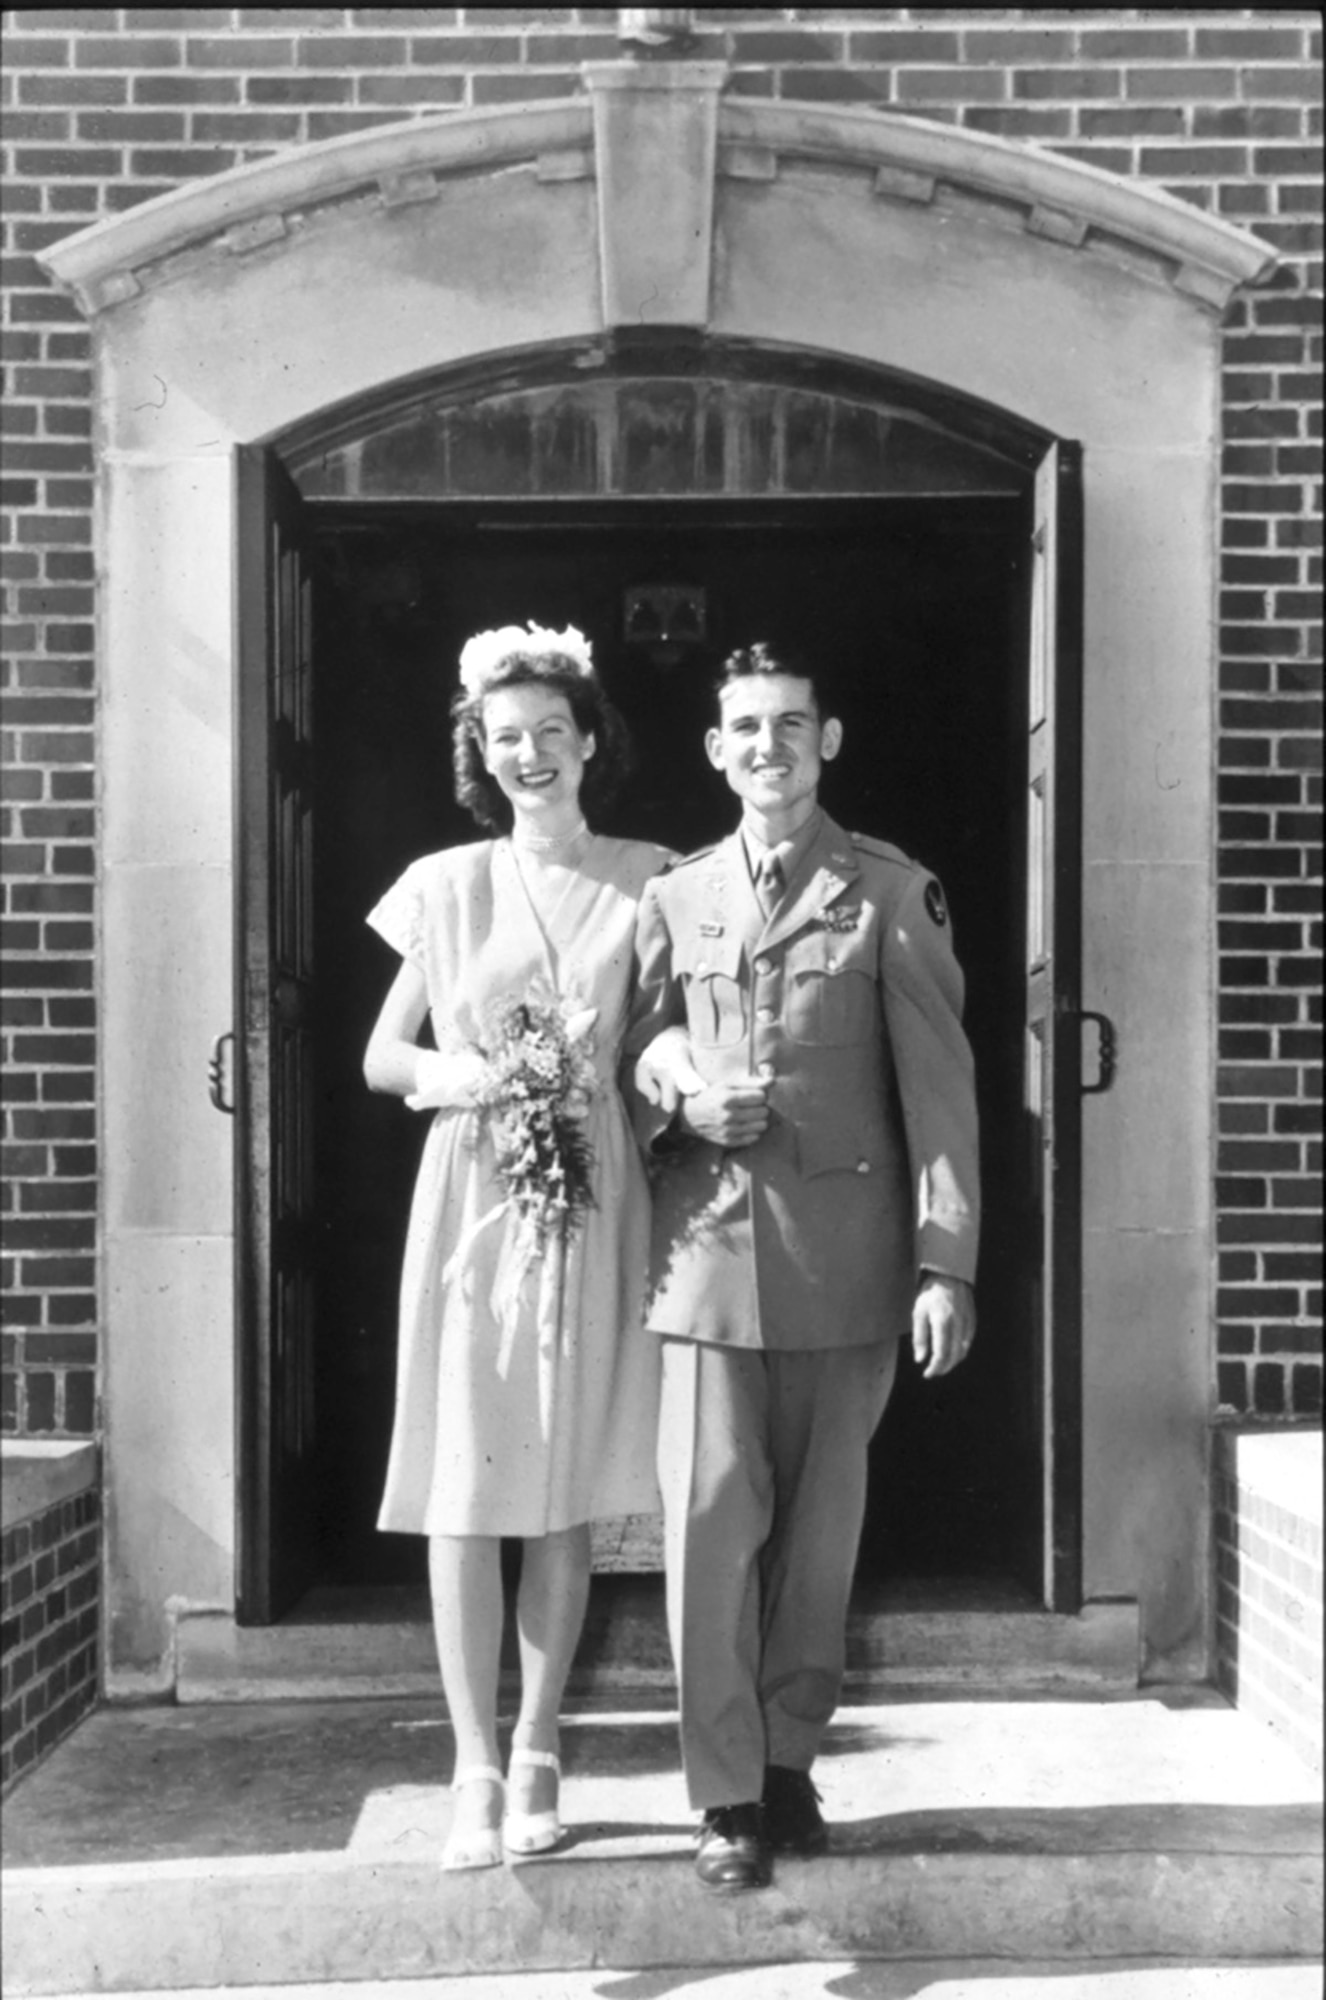 Marie and 1st Lt. John Clark radiate happiness after getting married in Iowa, July 10, 1945. The couple met in May 1944 at Las Vegas Army Base, during World War II. John was training to be a co-pilot in a B-17 Flying Fortress aircraft, and Marie was a Women’s Air Force Service Pilot, otherwise known as WASP, and graduated with her wings two months before he did. Her duties included flying fighter aircraft and performed mock fighter attacks on B-17s. John was stationed at the 100th Bomb Group at Thorpe Abbotts, England, and flew 32 missions over Germany. They were married one year later and were together for 63 years, until Marie passed away in 2008. (Courtesy photo from Clark family)